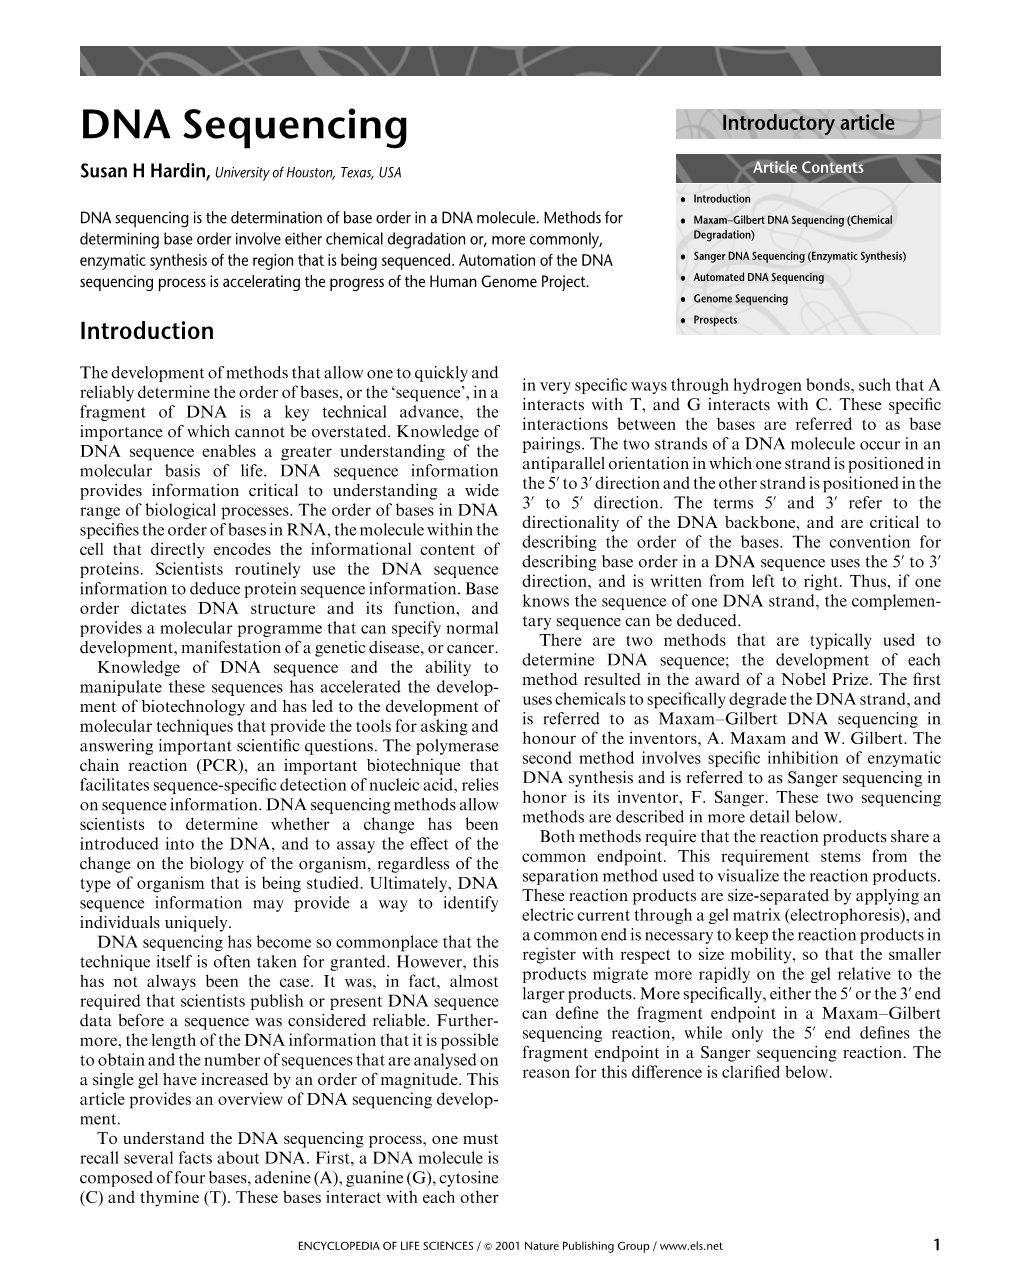 DNA Sequencing Introductory Article